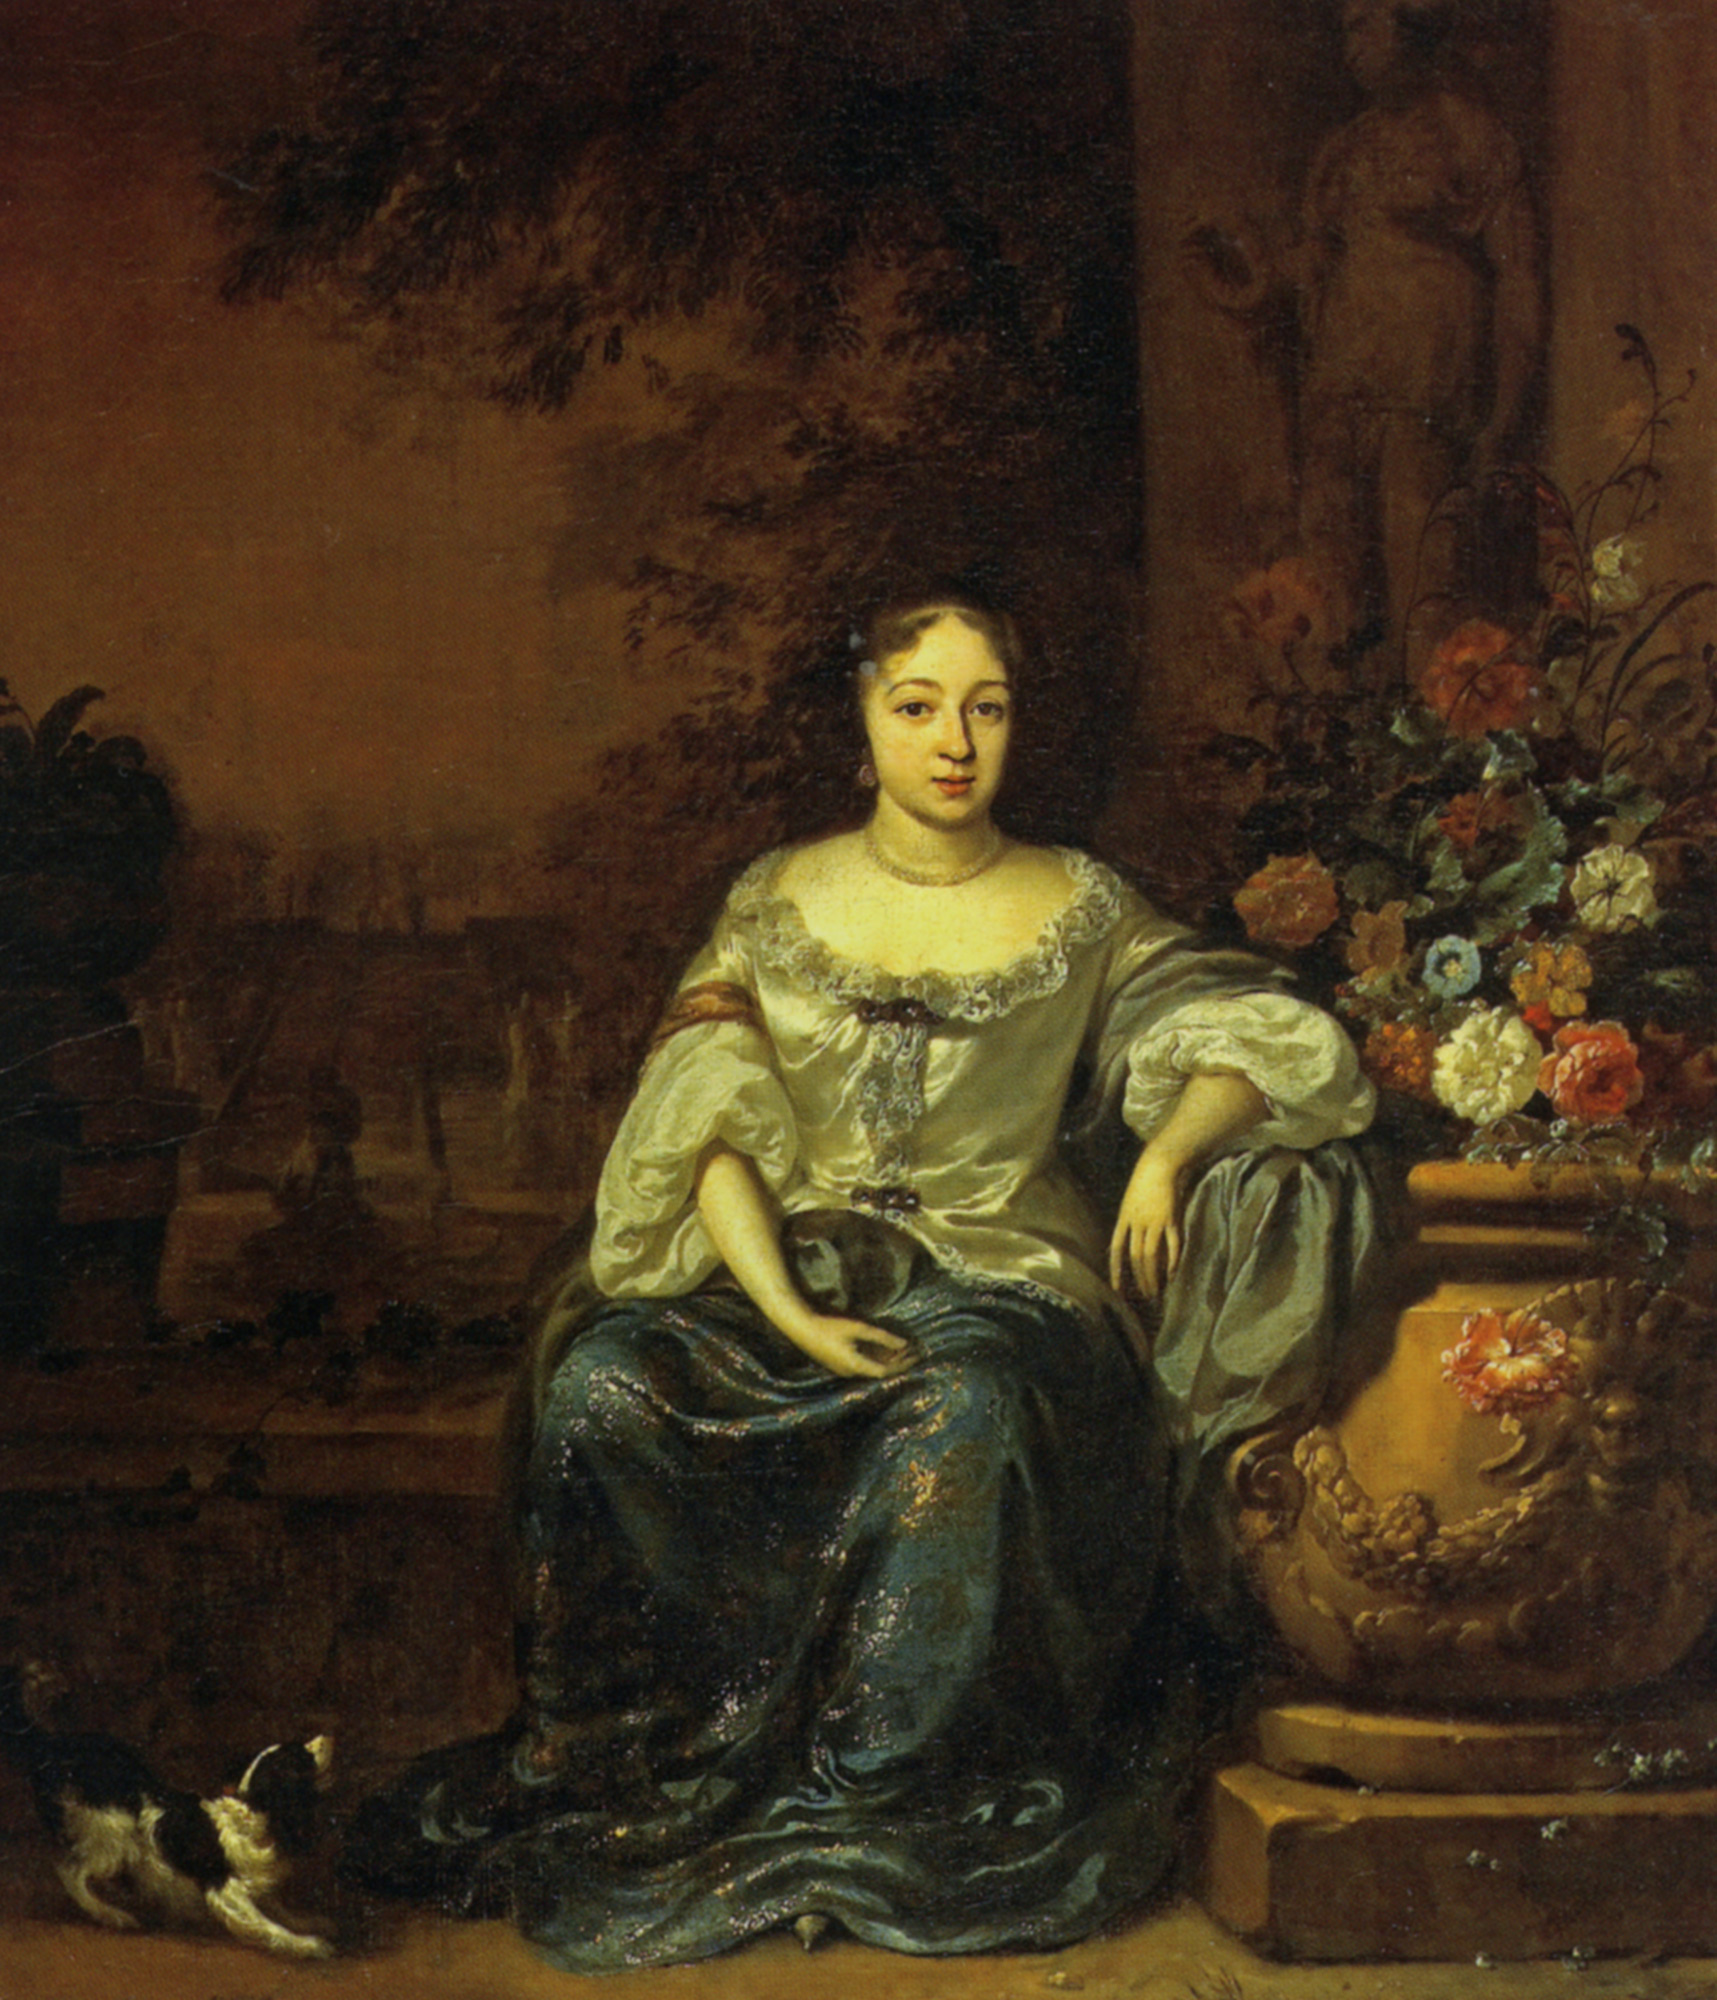 Portrait-of-a-Lady-Seated-in-a-Garden-with-her-Dog-by-Jan-Weenix